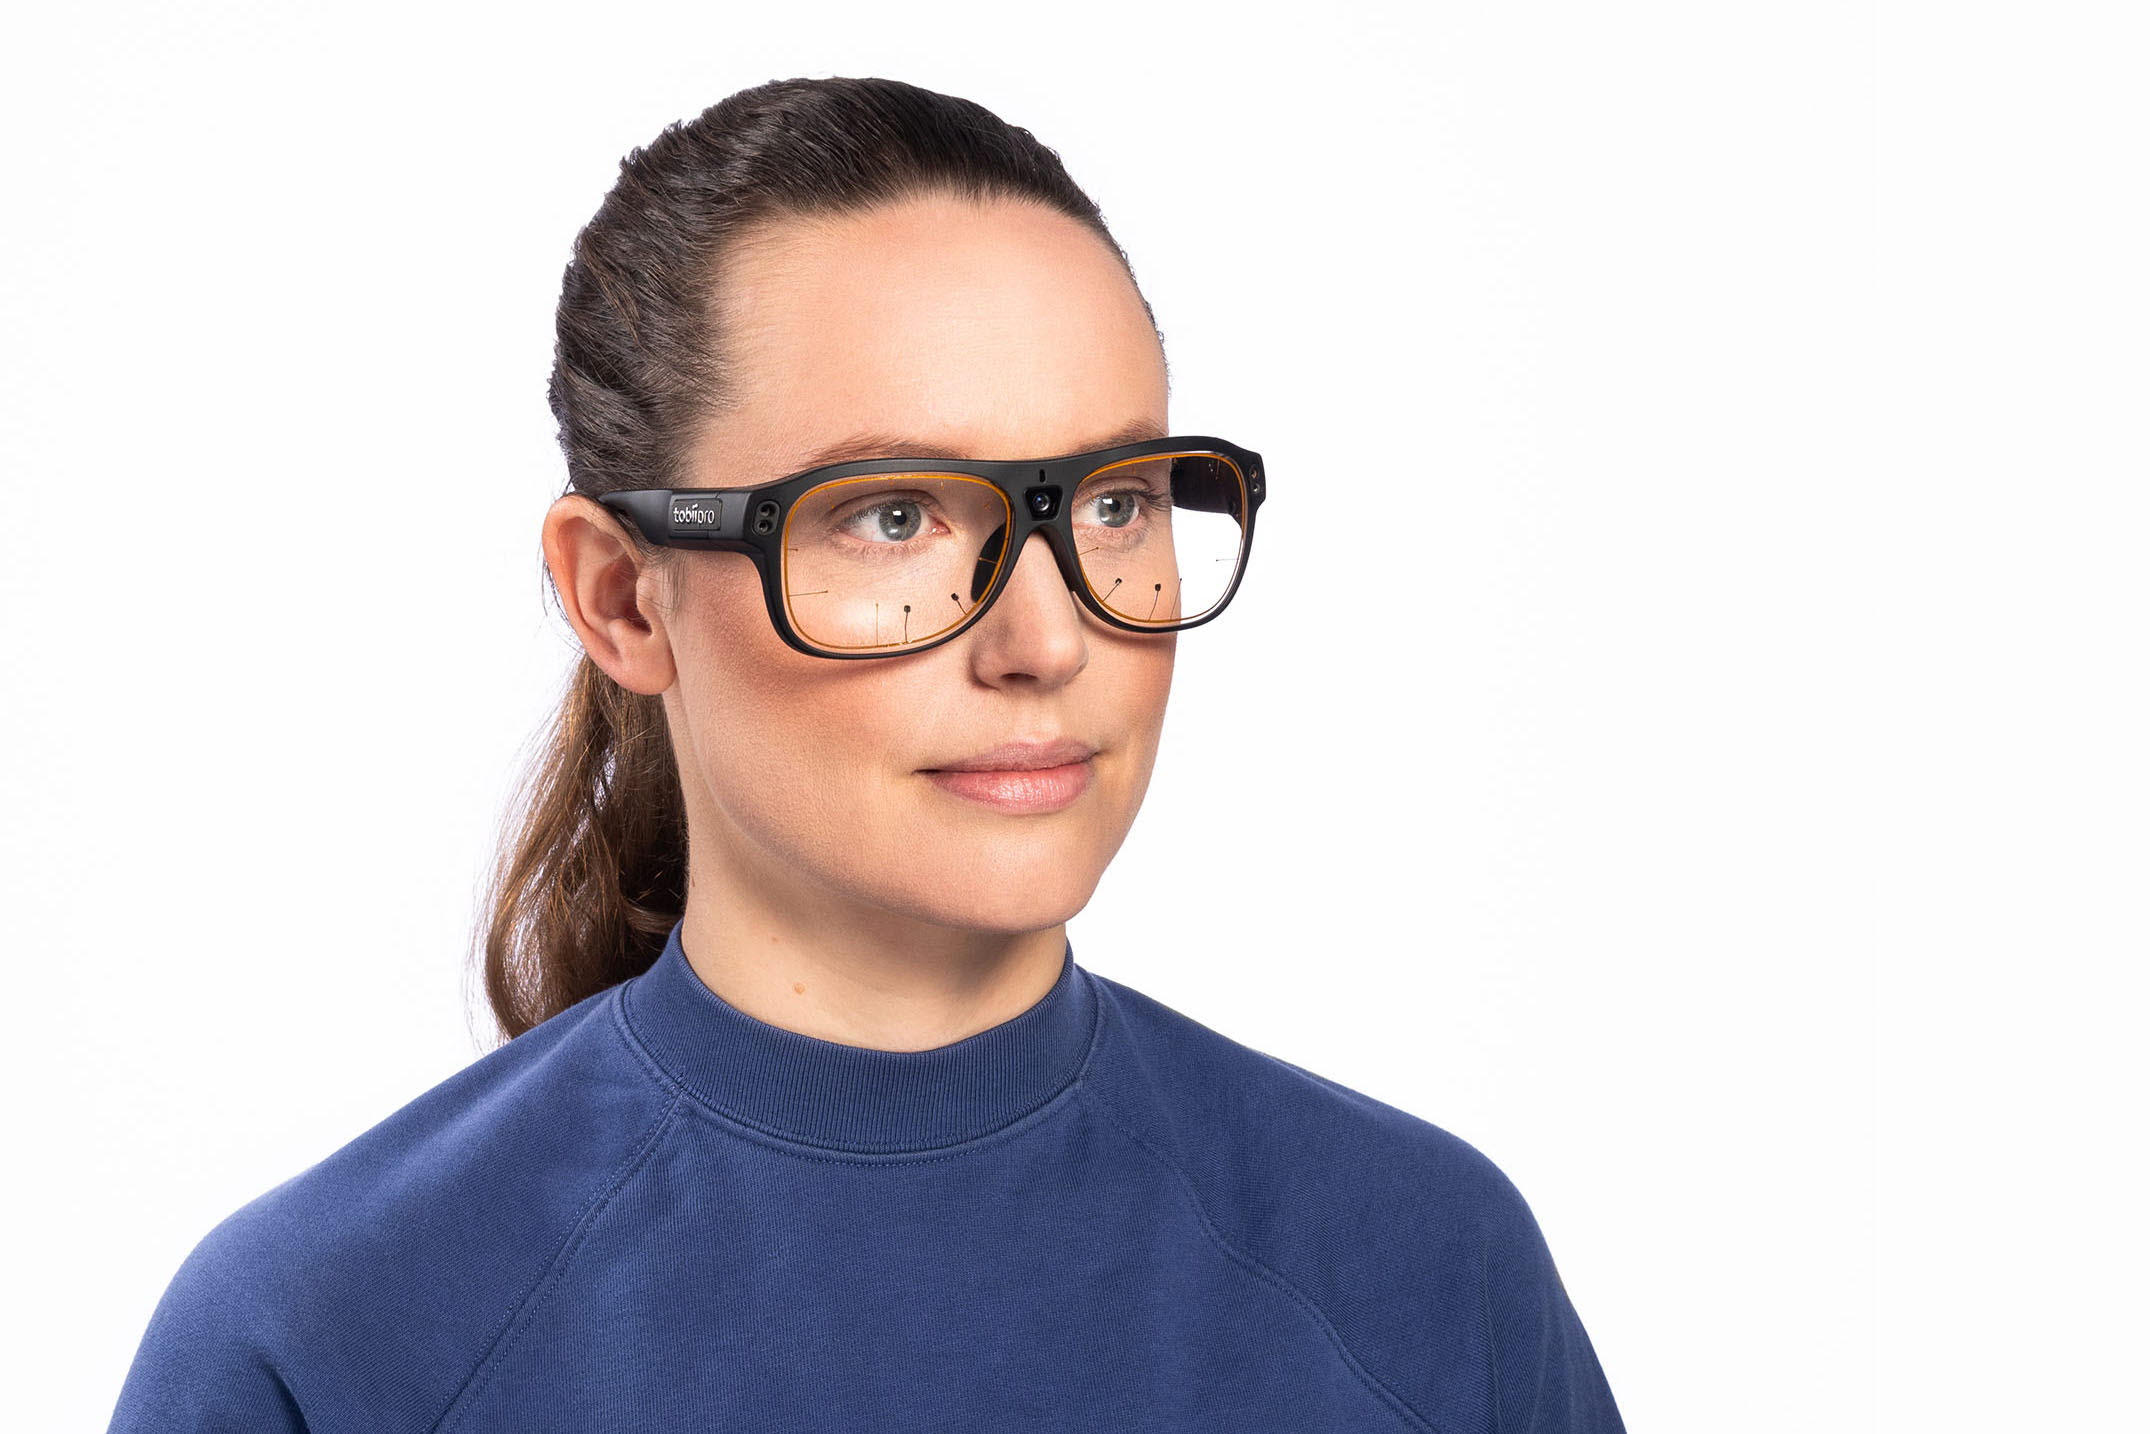 Tobii Pro Glasses 3 on a woman